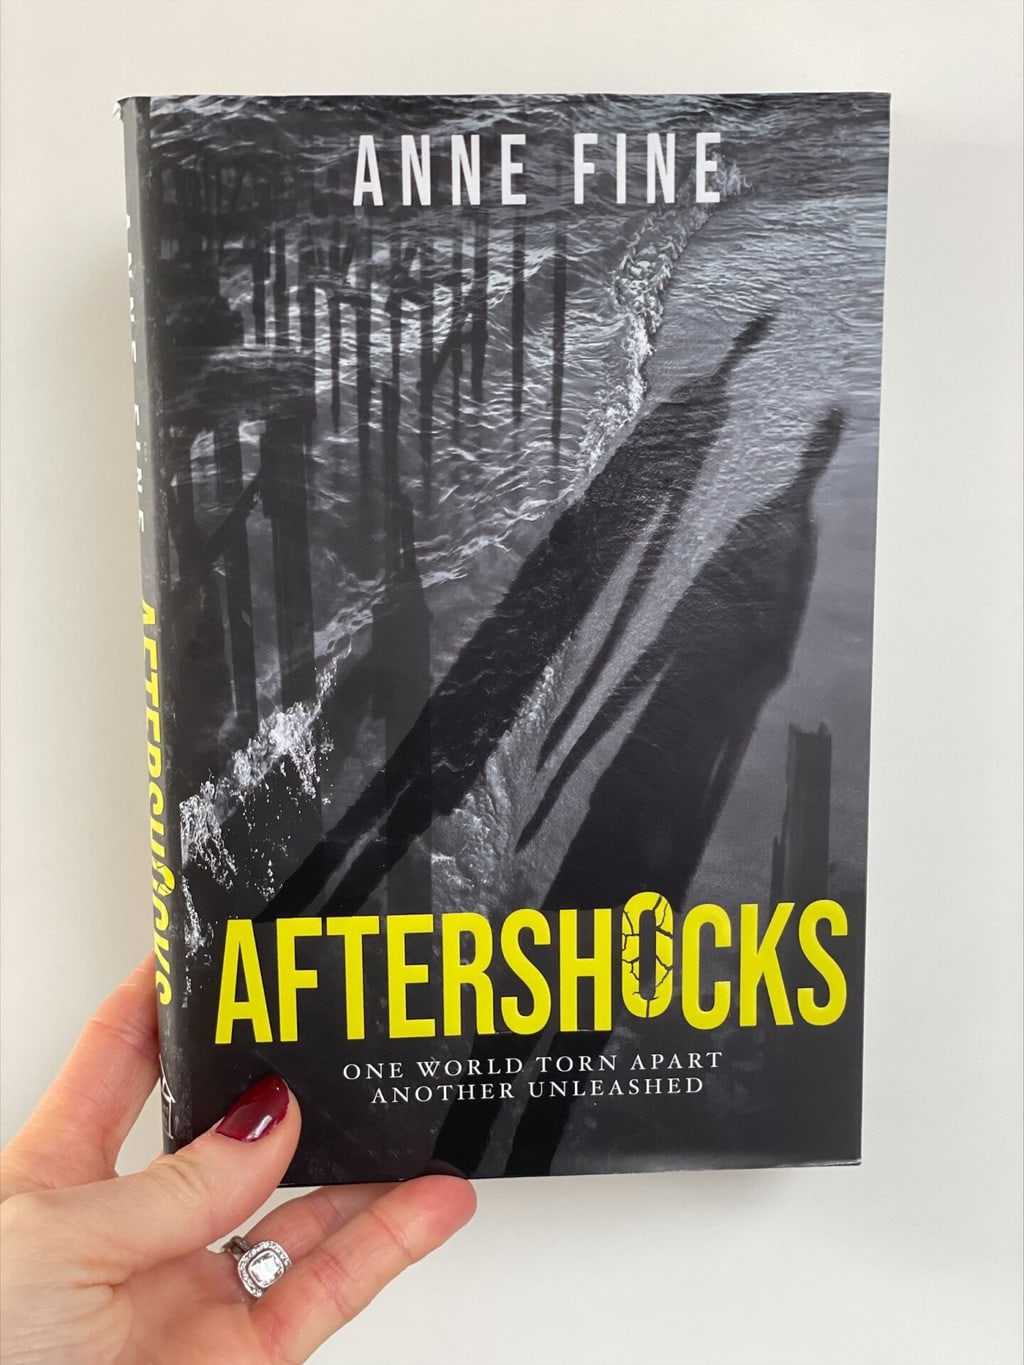 Aftershocks  - Anne Fine (author), Old Barn Books (publisher) – recommended reading age, 10 plus